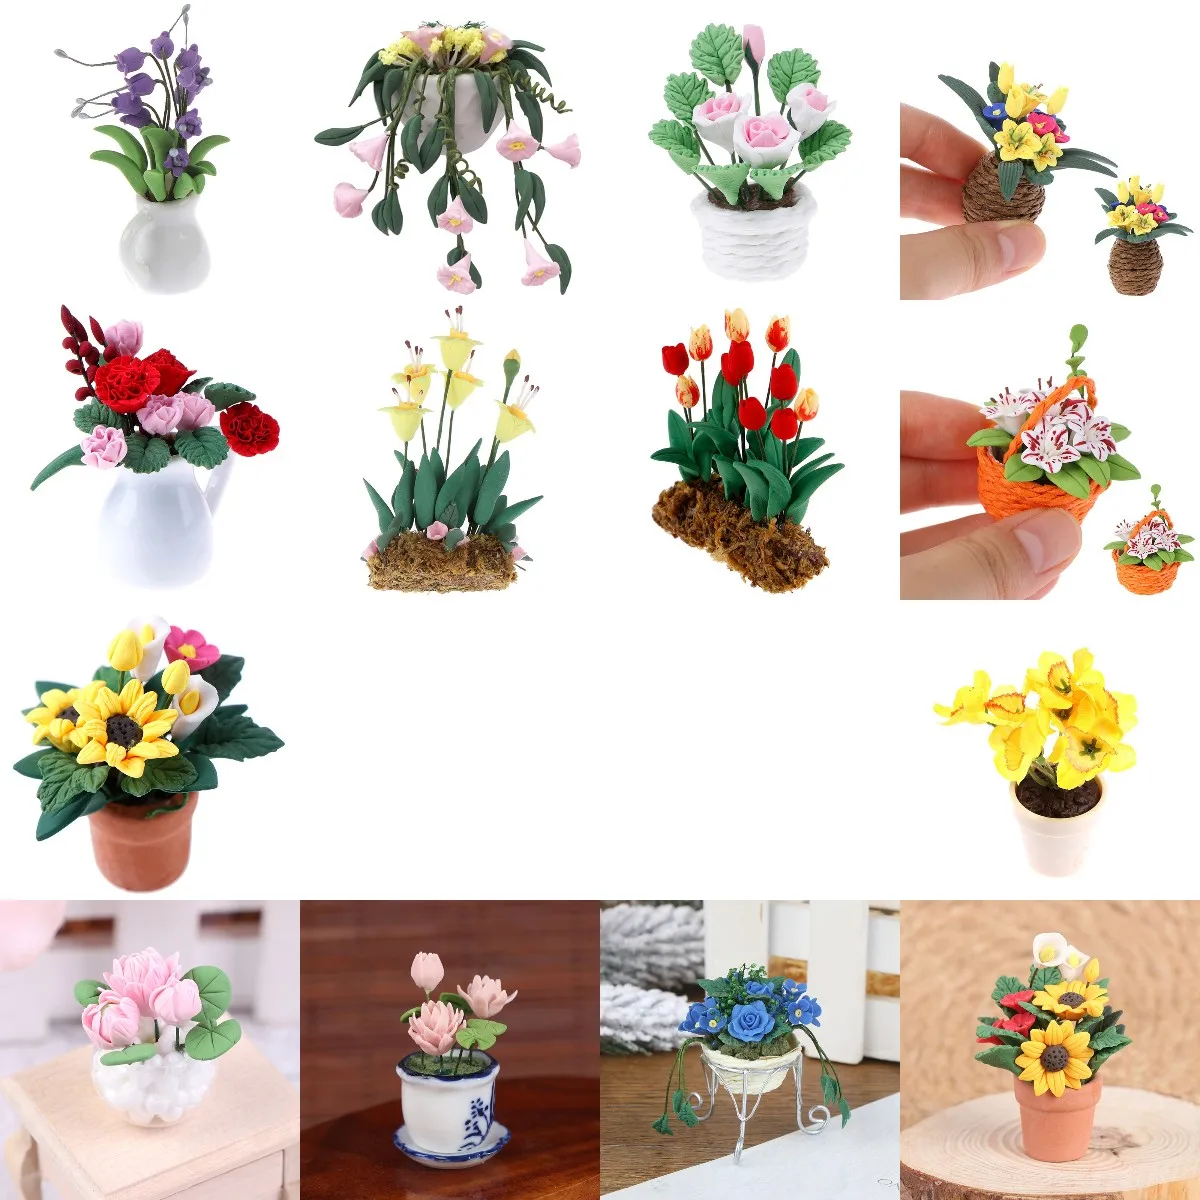 1/12 Green Et Doll Dollhouse Miniature Plant Multicolor Tulips Lily Lotus Sunflower Green Plant Flower Collection Garden Doll dilis niche collection flower overdose 50